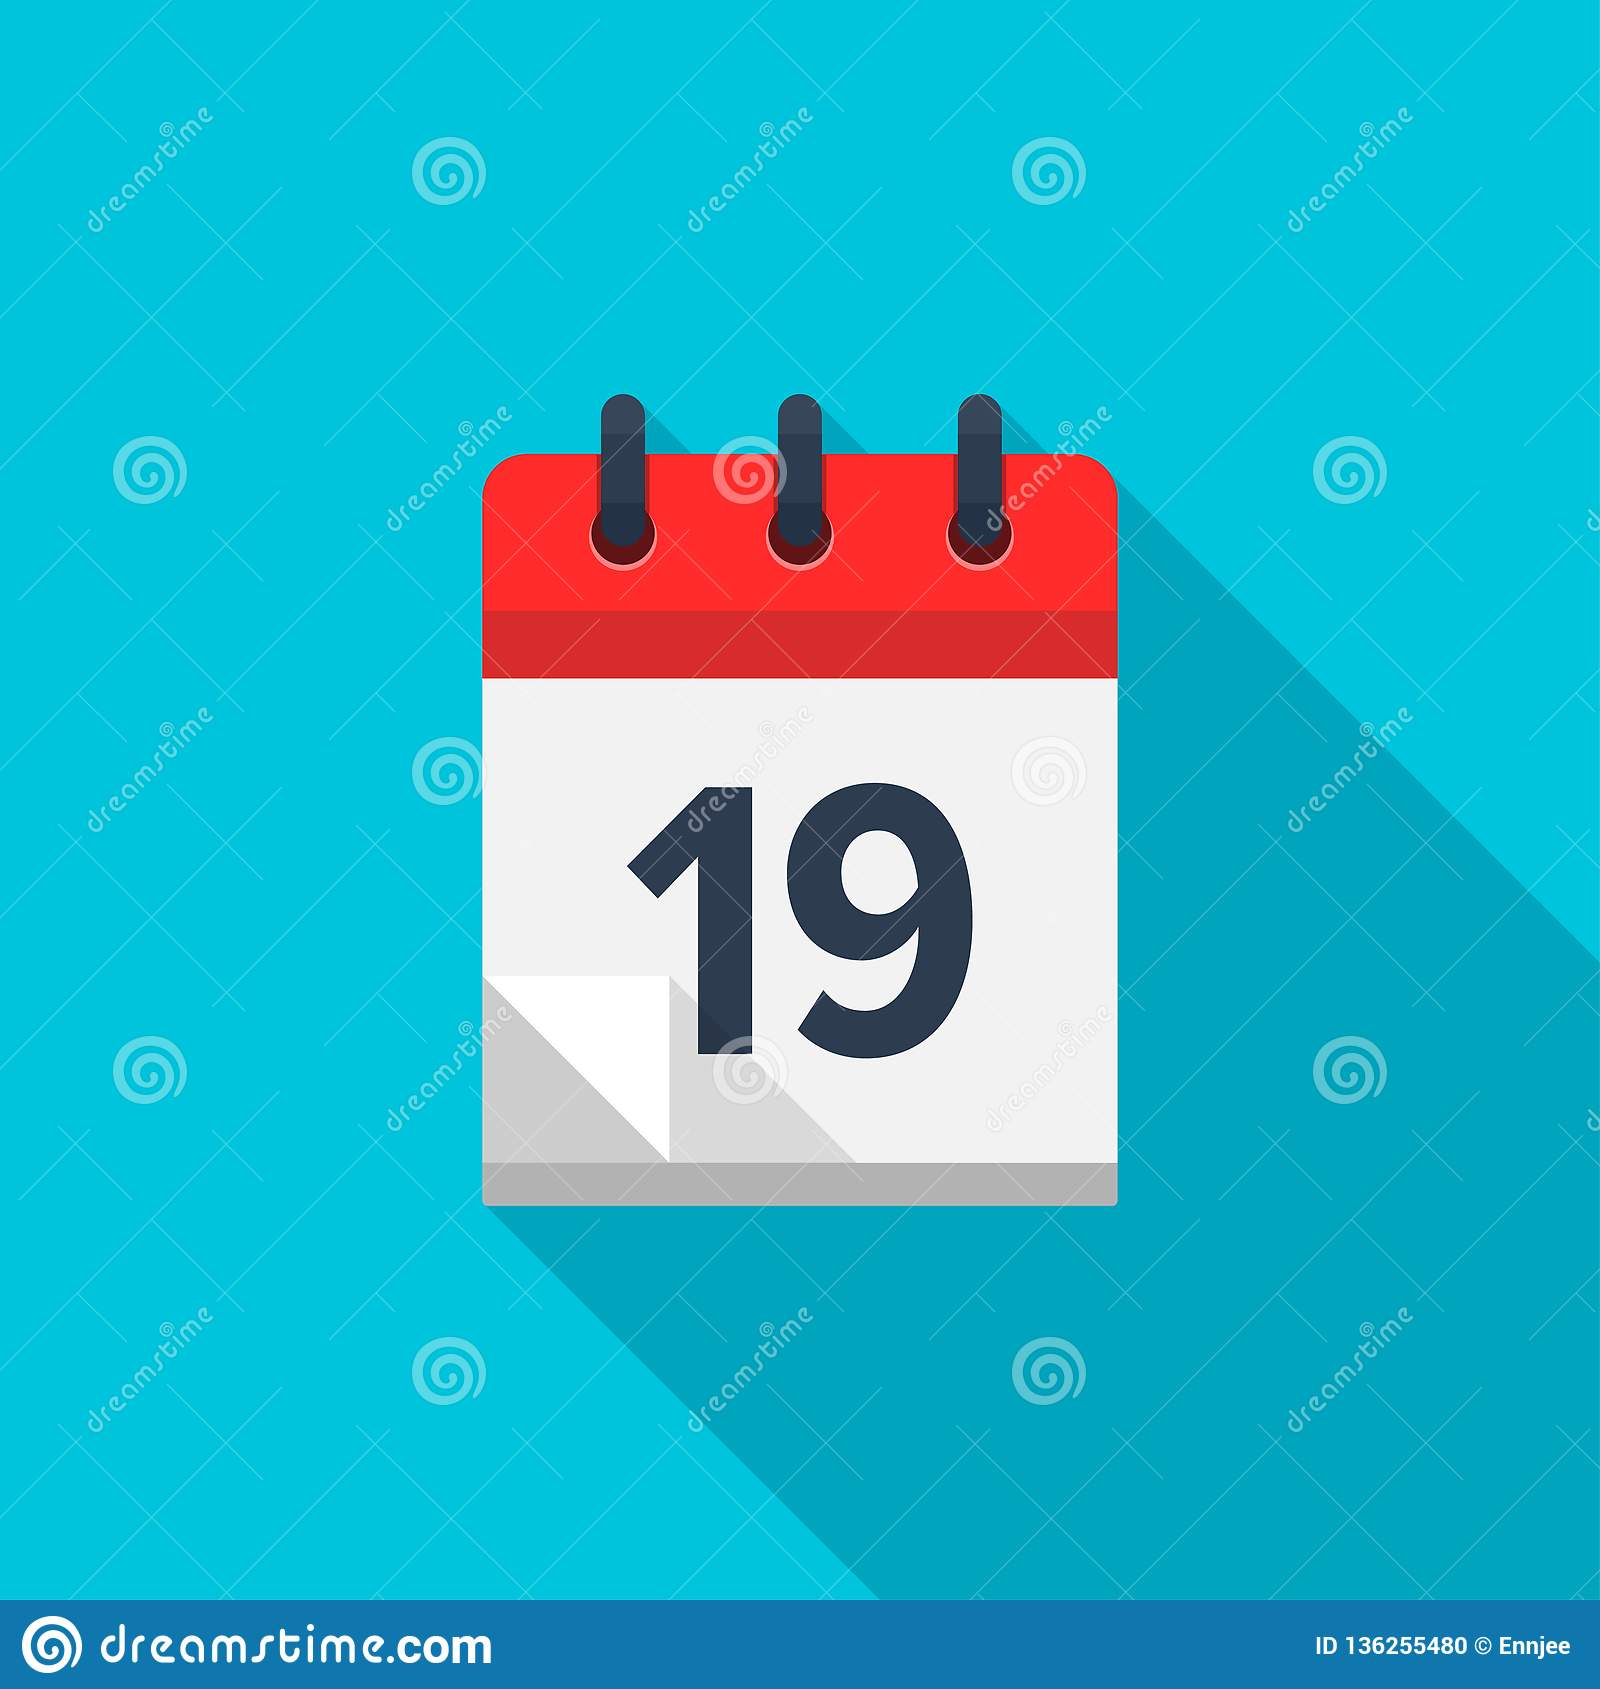 Flat Calendar Icon. Date And Time Background. Number 19. Stock Vector within Time And Date Calender